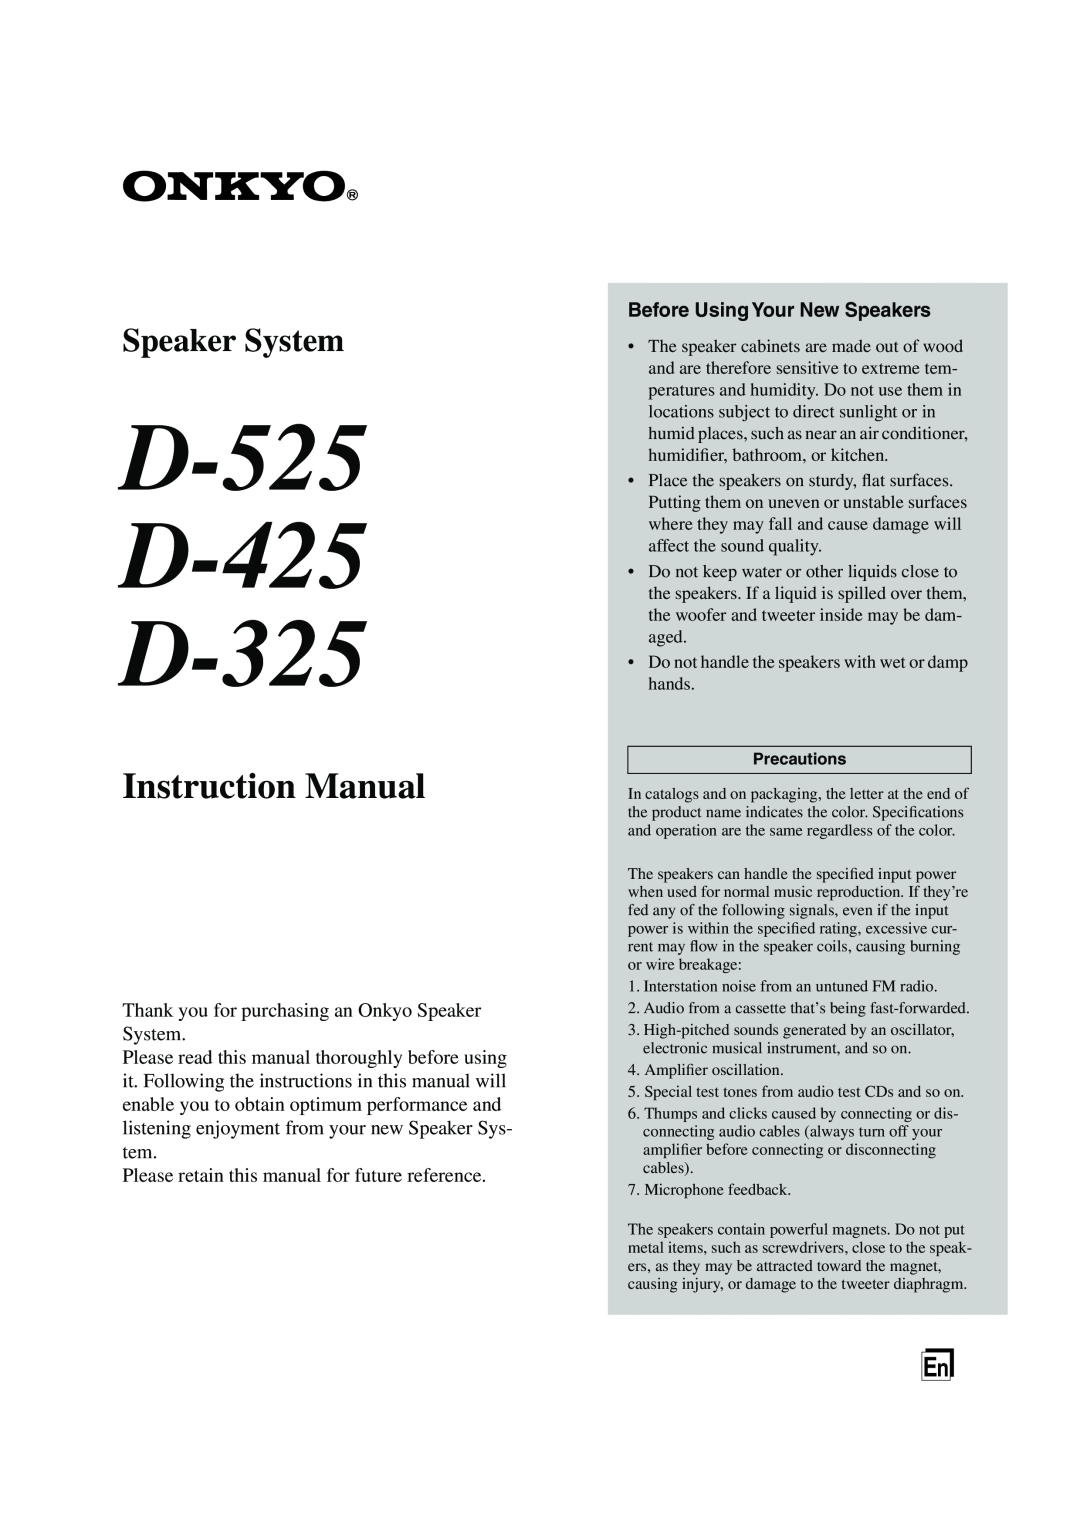 Onkyo instruction manual D-525 D-425 D-325, Instruction Manual, Speaker System, Before Using Your New Speakers 